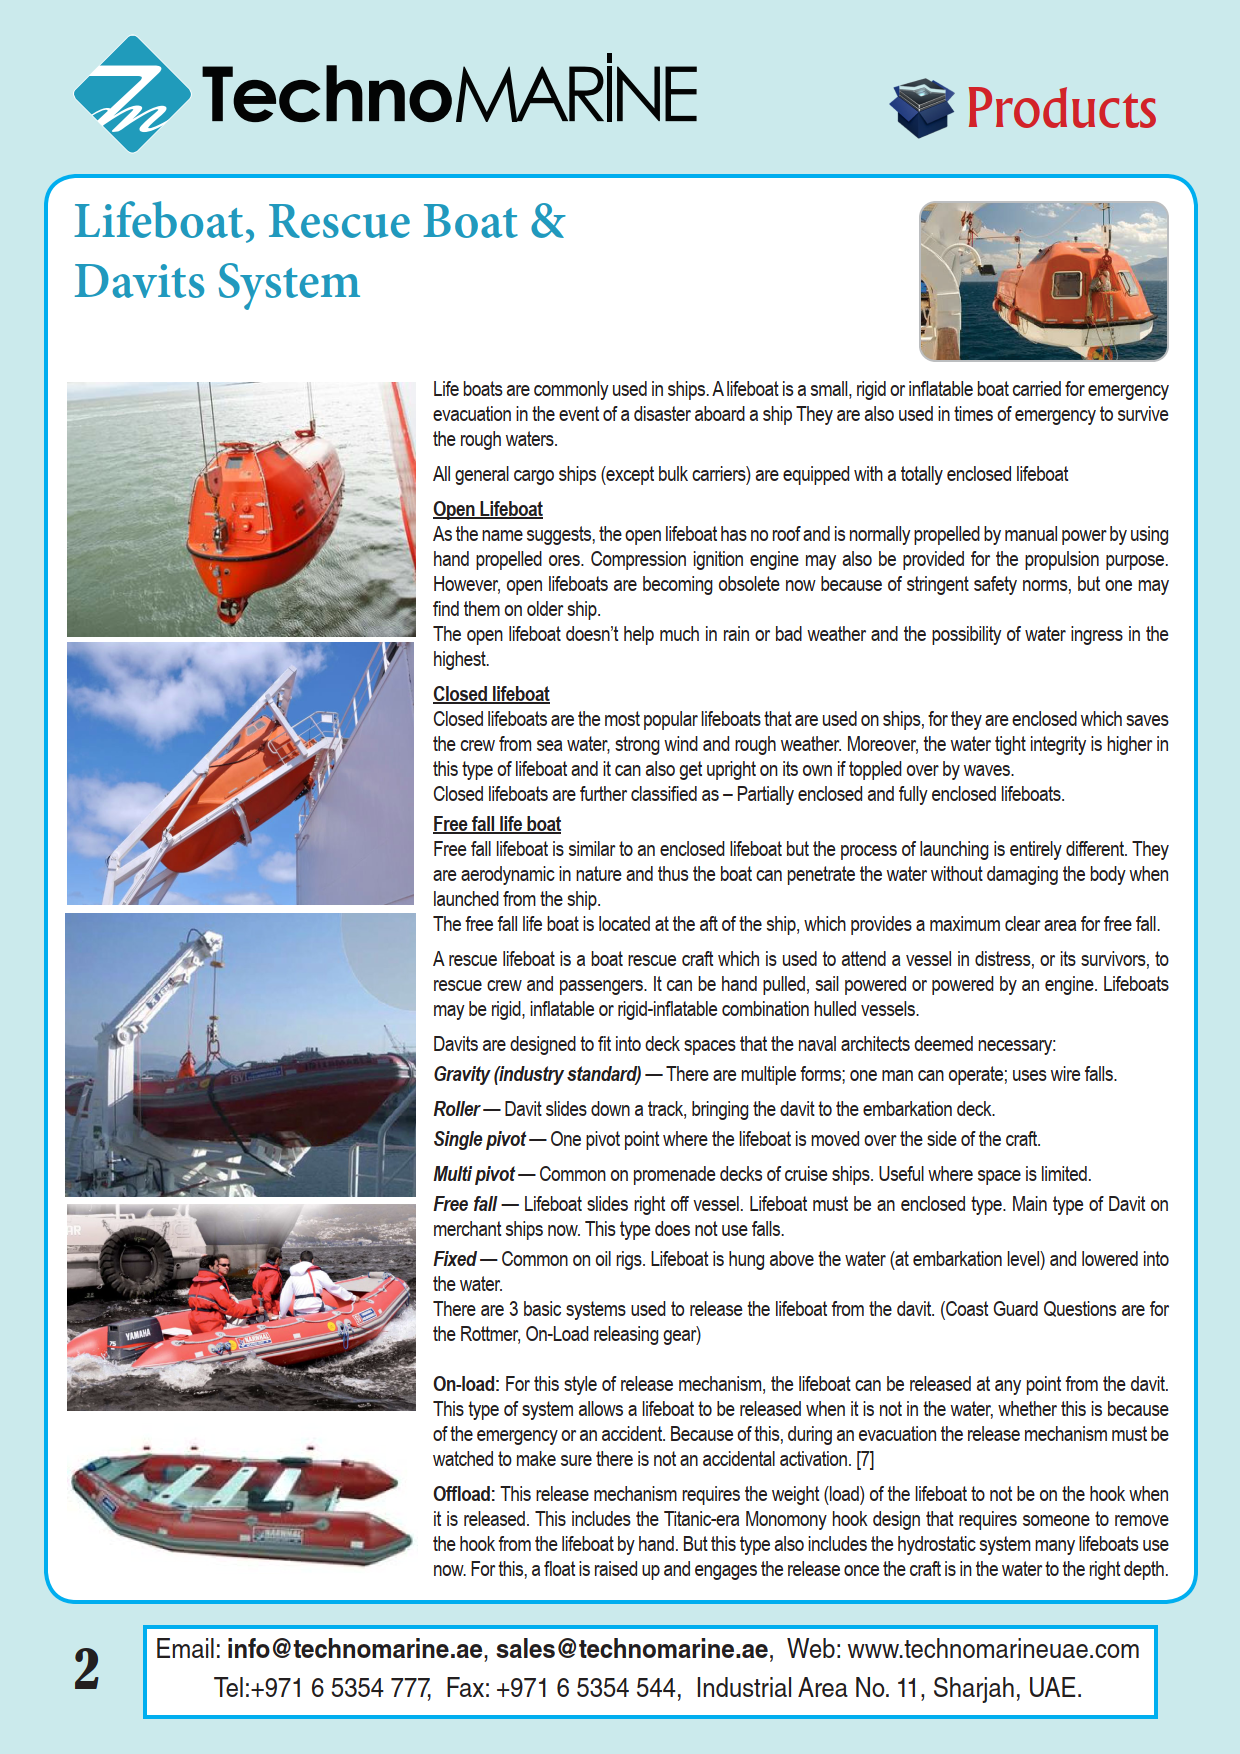 Lifeboat, Rescue boat and Davit Systems